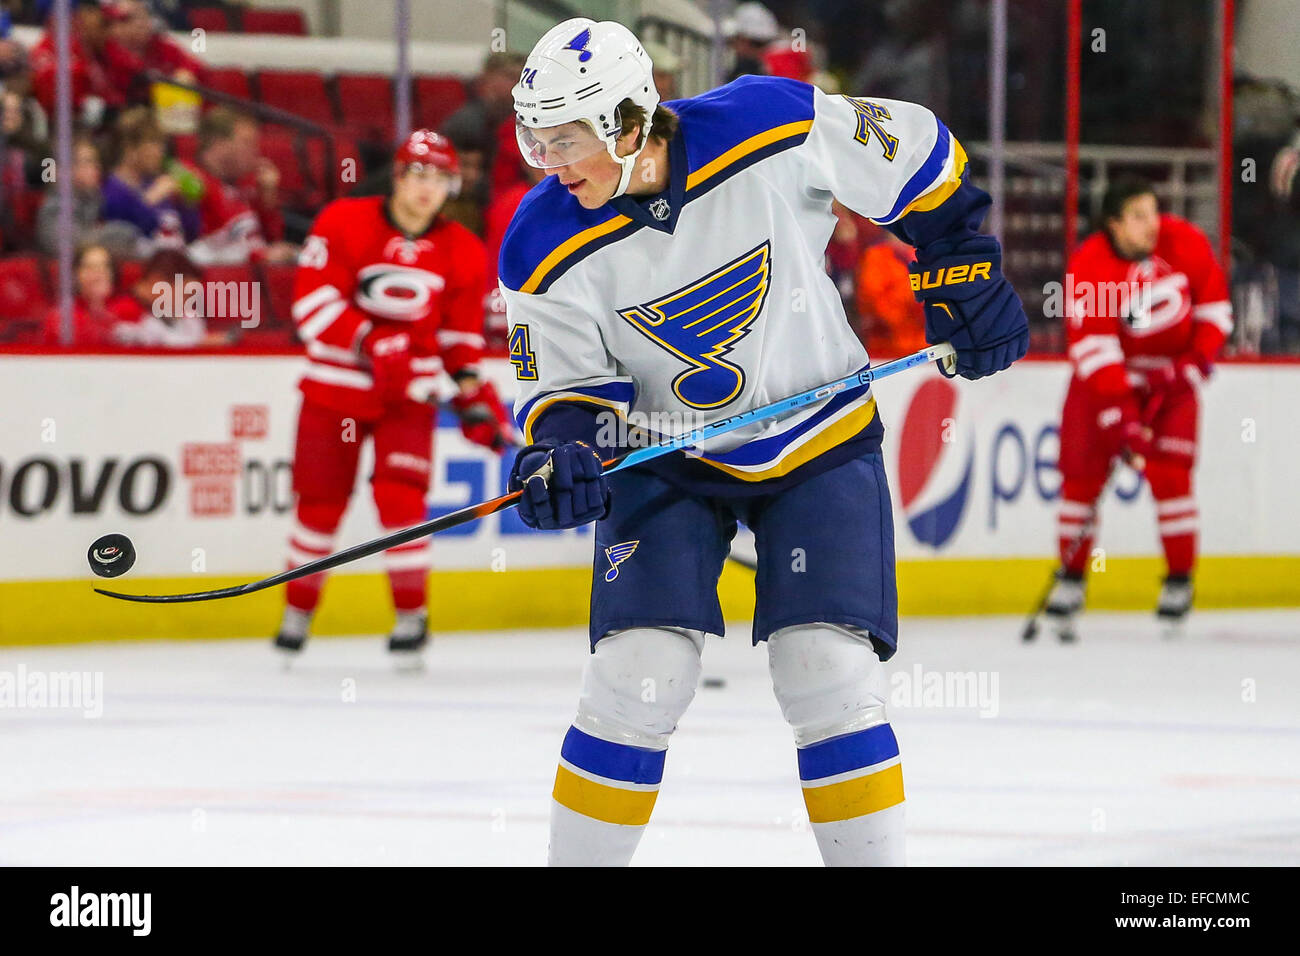 St. Louis Blues - Players wore military jerseys bearing